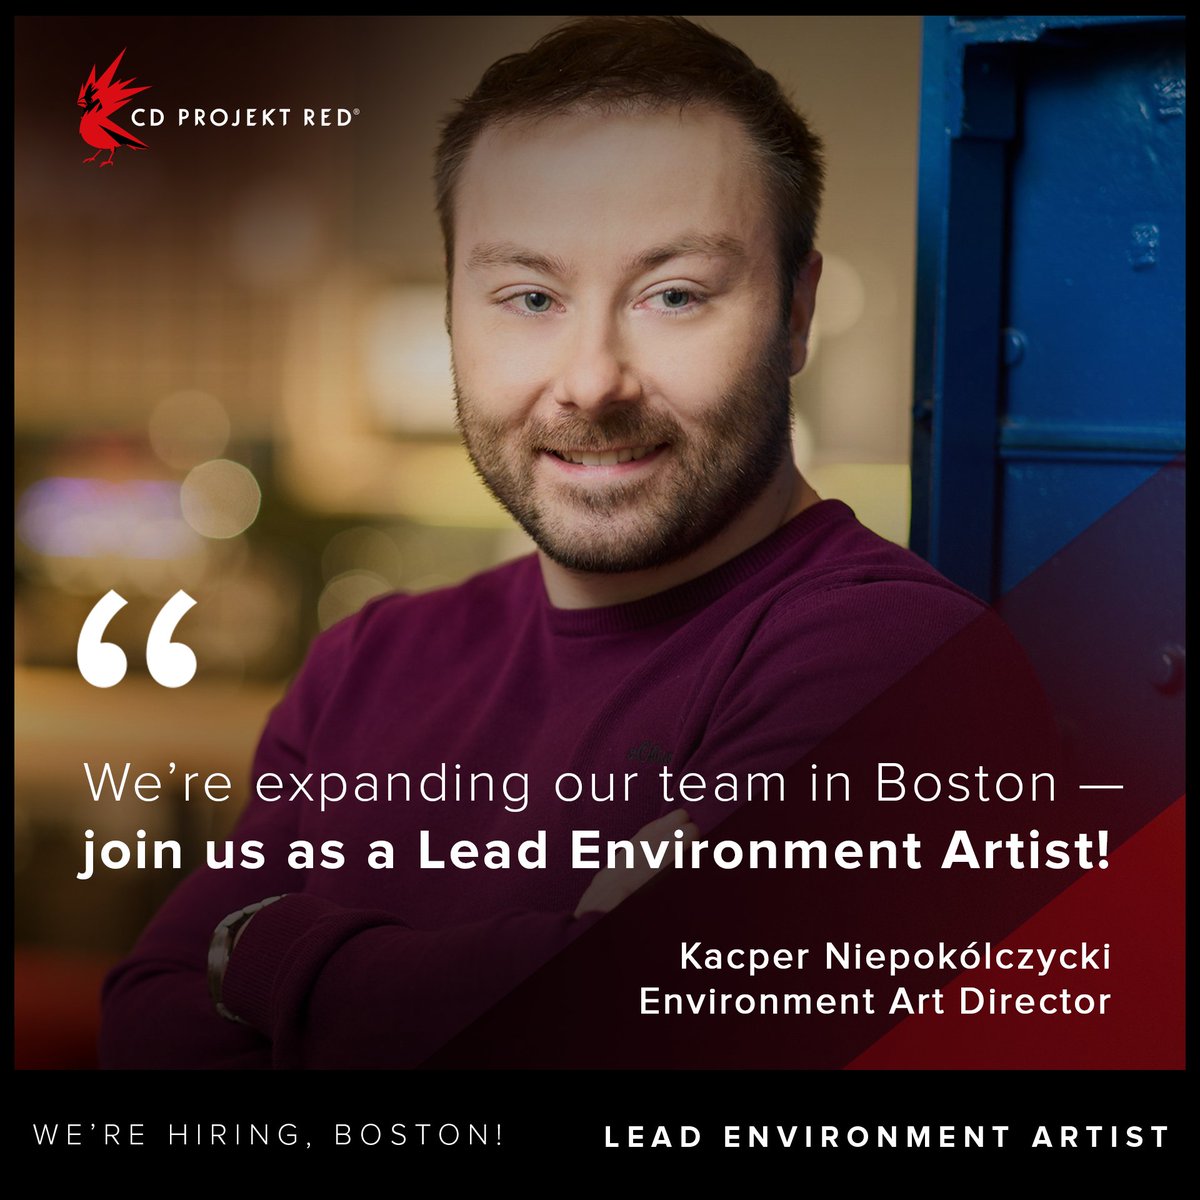 My dears, as you know we are recruiting spectacular people for the next #Cyberpunk2077 game to the Boston studio. One of the roles is Lead Environment Artist -- you would work with my choom Kacper on building some remarkable art 🔥 Check it out: lnkd.in/dmdaFYPz ❤️